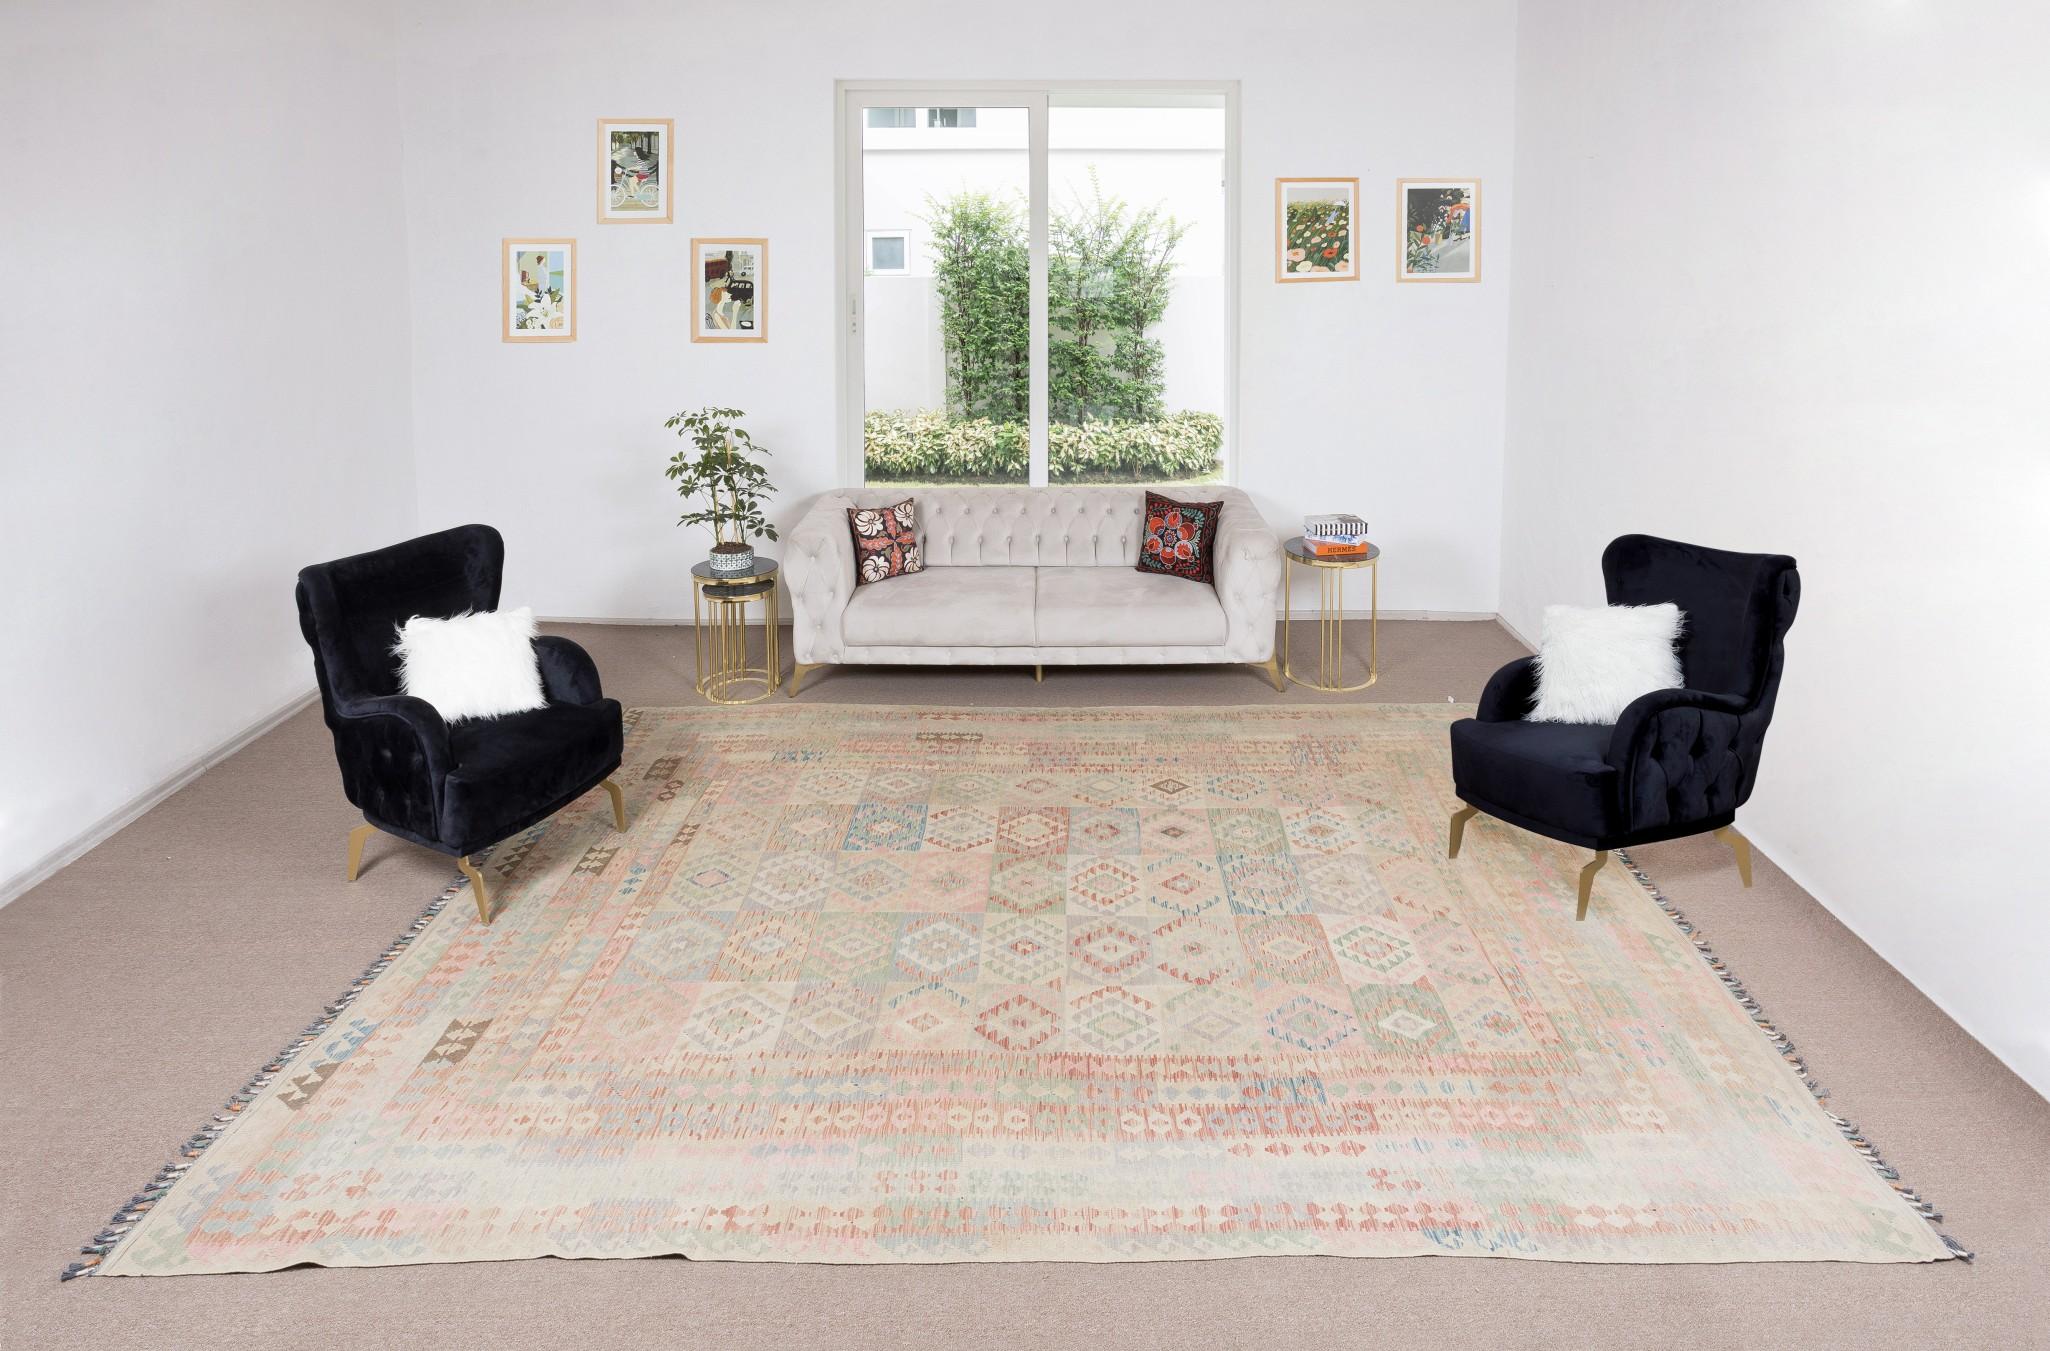 This authentic hand-woven rug made to be used by the villagers in Central Anatolia. 100% organic wool. 
Good condition and washed/cleaned professionally.
Ideal for both residential and commercial interiors.
We can supply a suitable rug-pad if